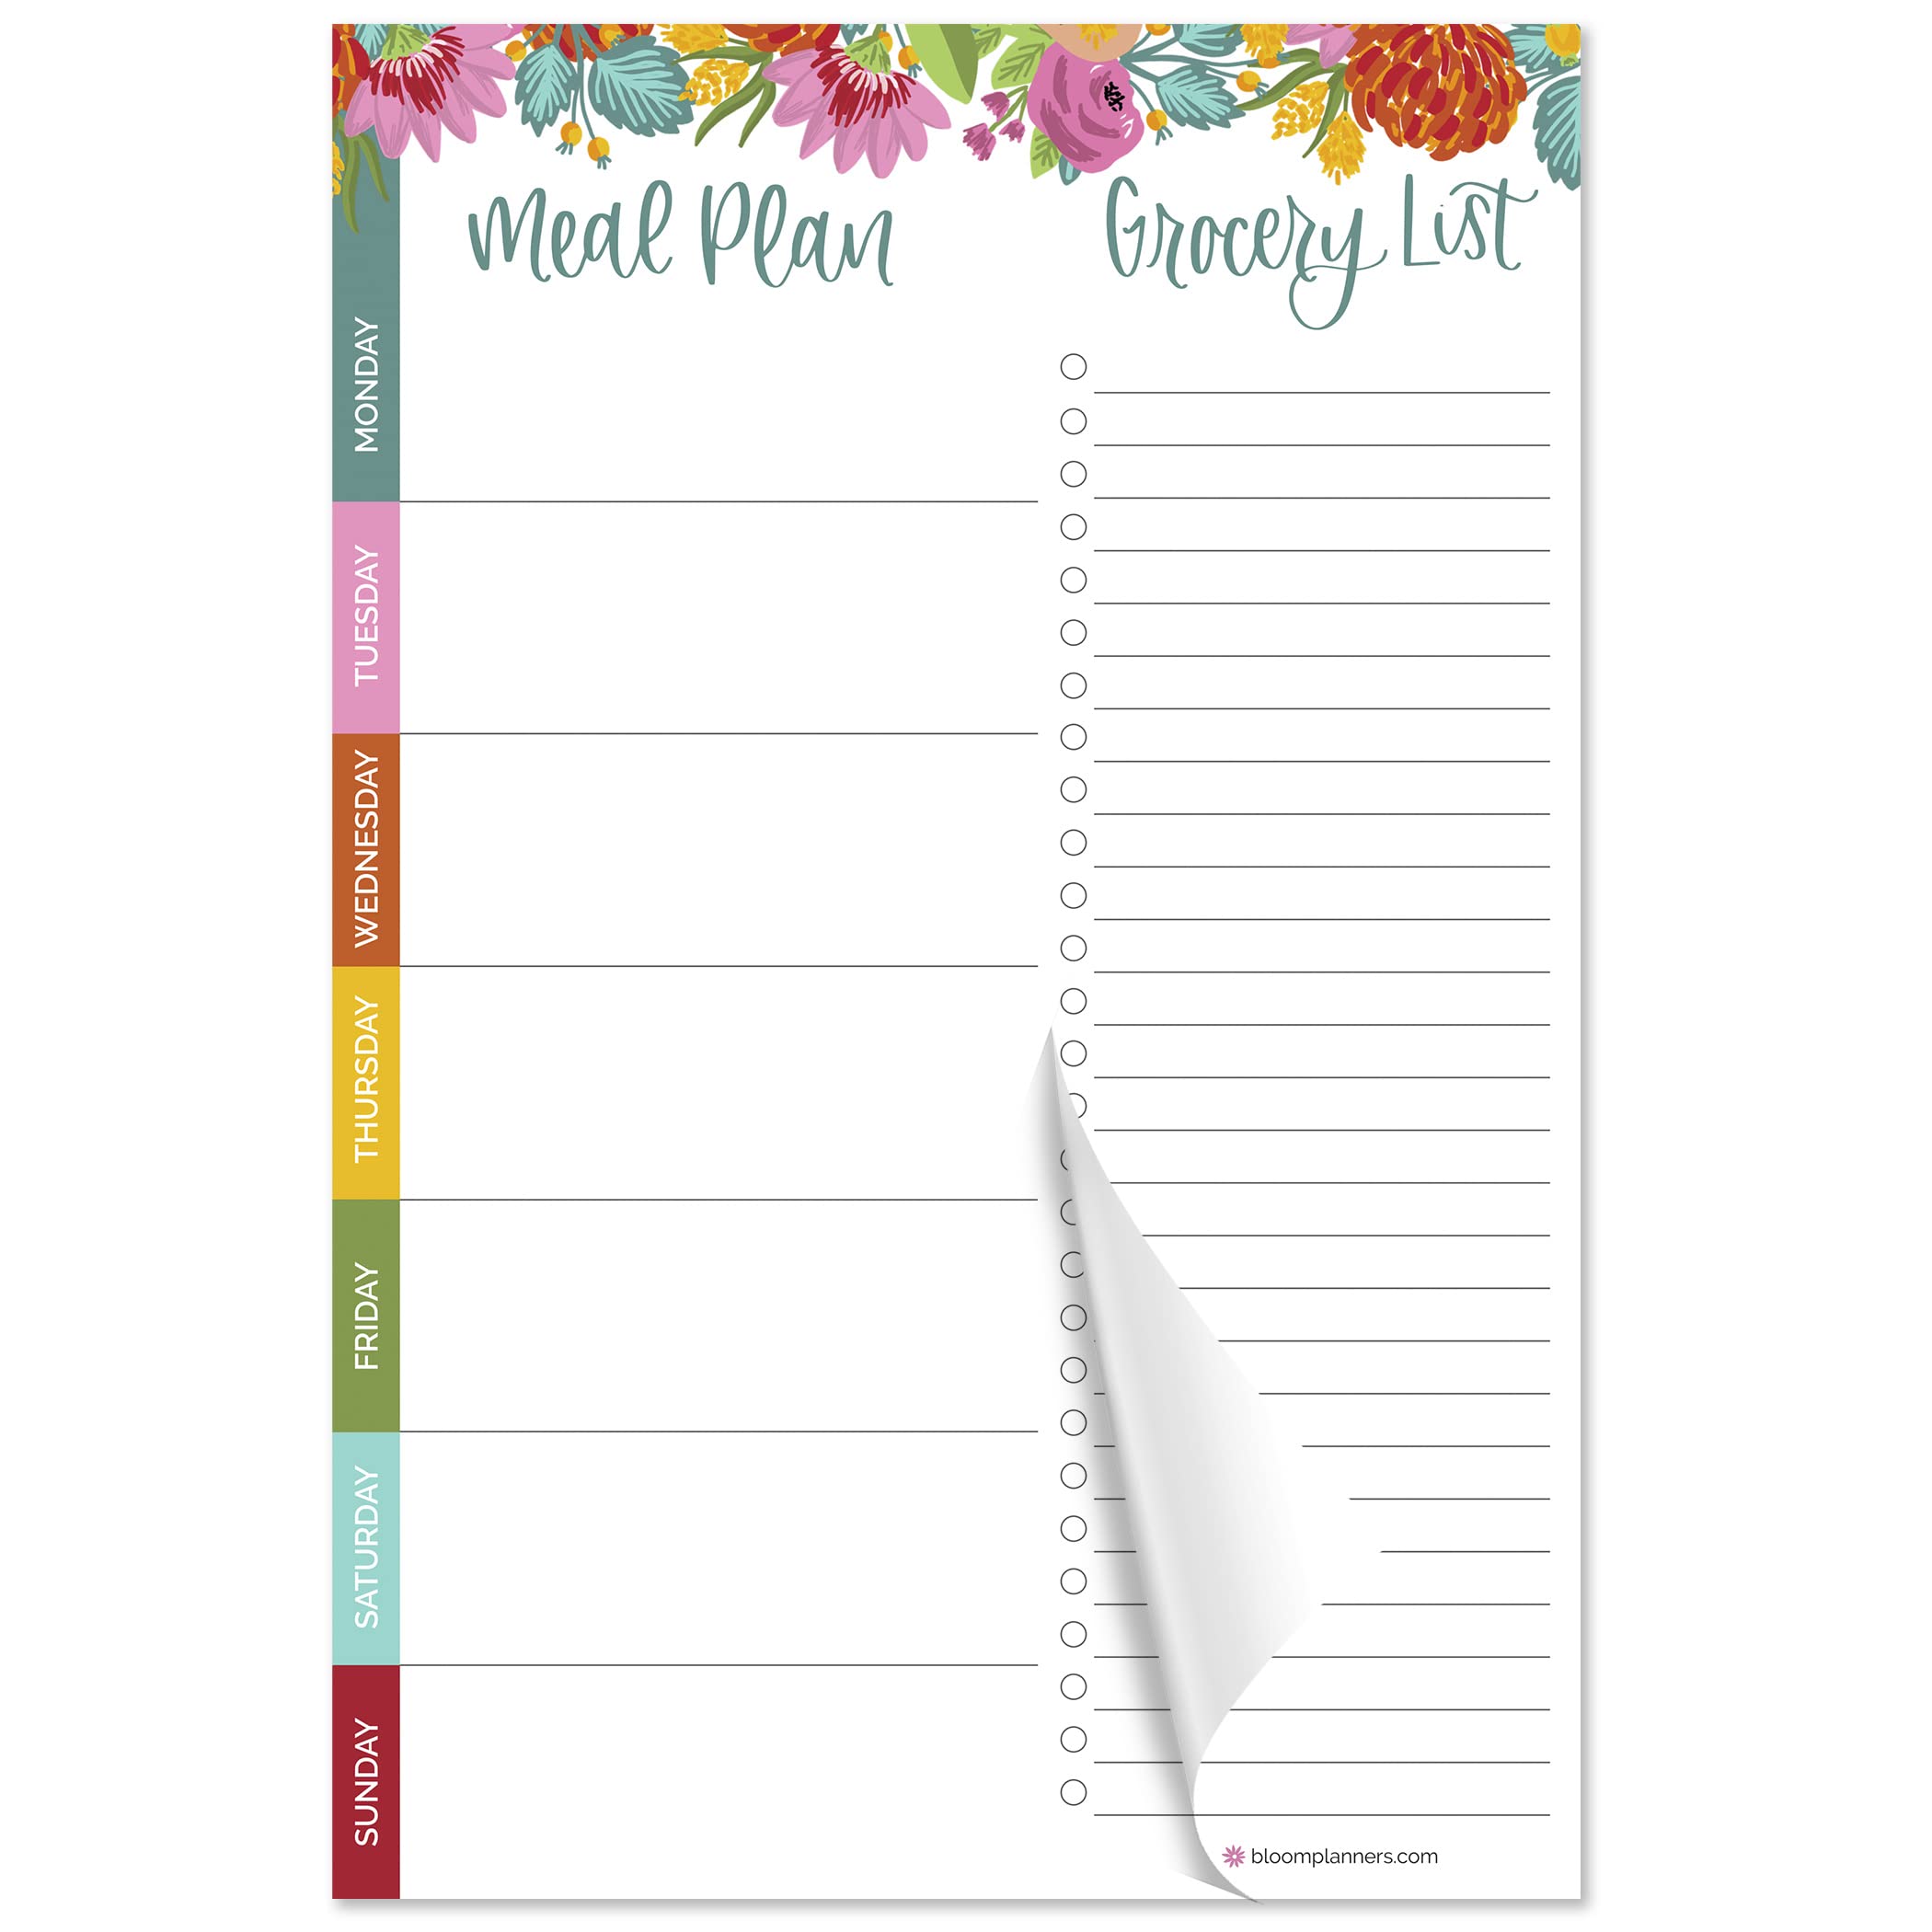 bloom daily planners Weekly Meal Planning Pad - Magnetic Hanging Refrigerator Menu Planner with Tear-Off Sheets  Perforated groc